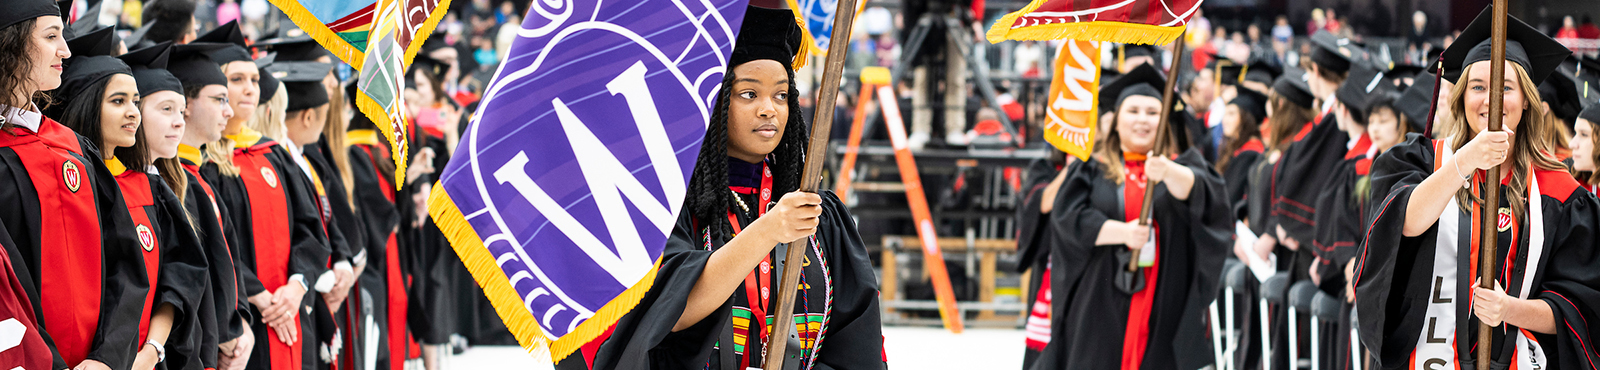 Flag bearers lead the academic procession during UW–Madison's spring commencement ceremony at the Camp Randall Stadium